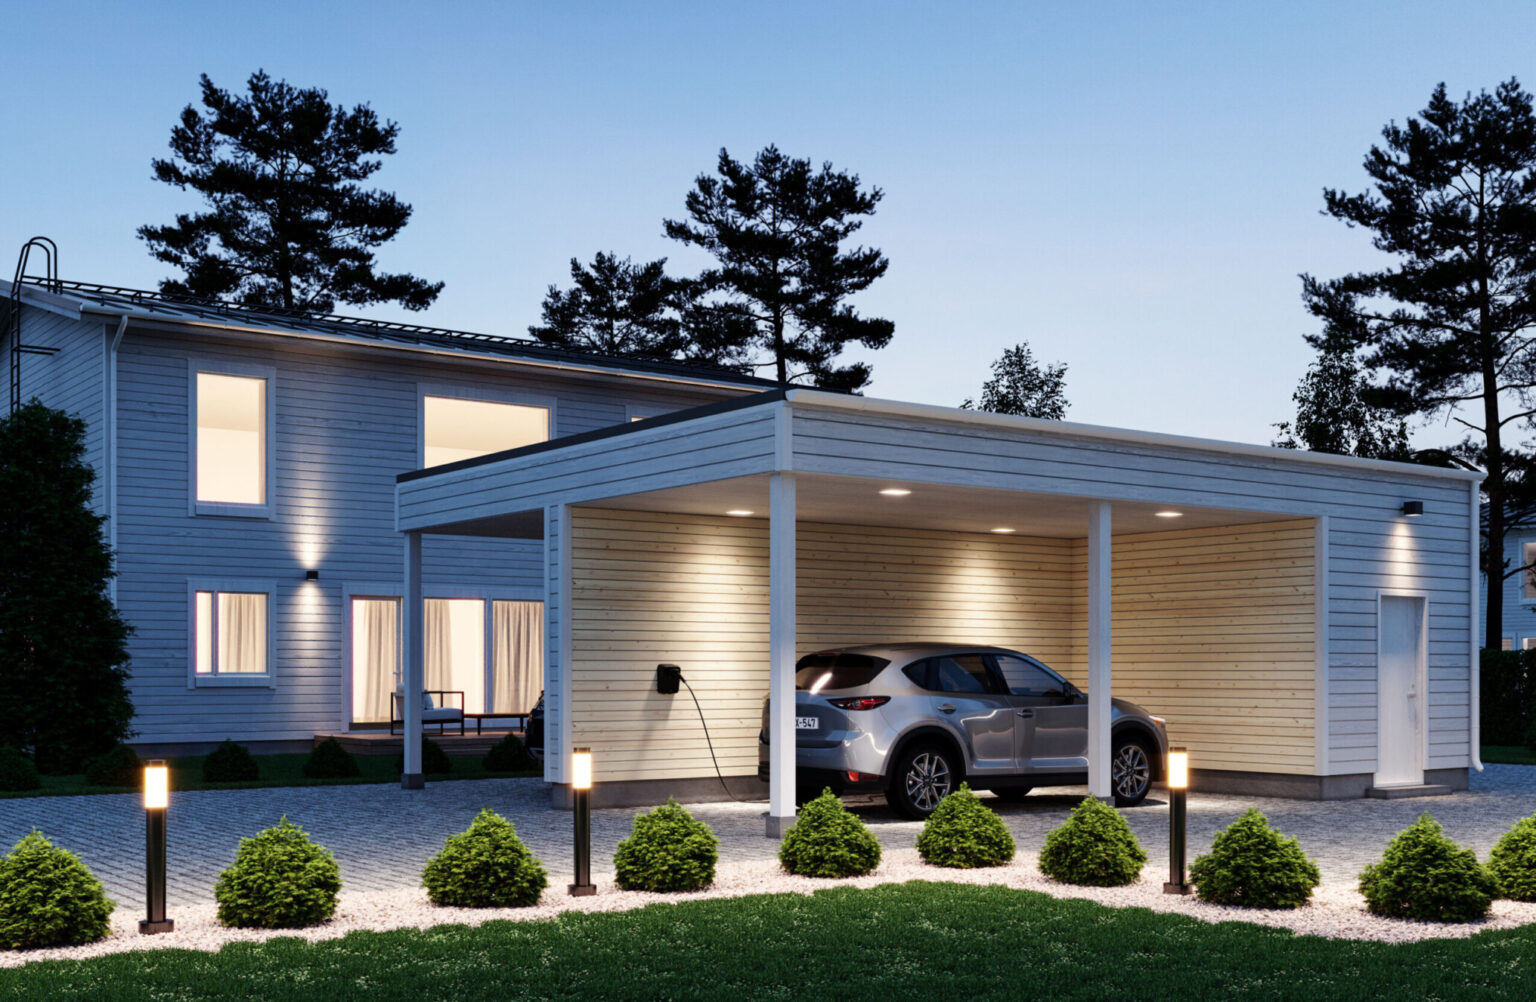 AppCharge EV Home Charging Station: Powering the Future of Mobility